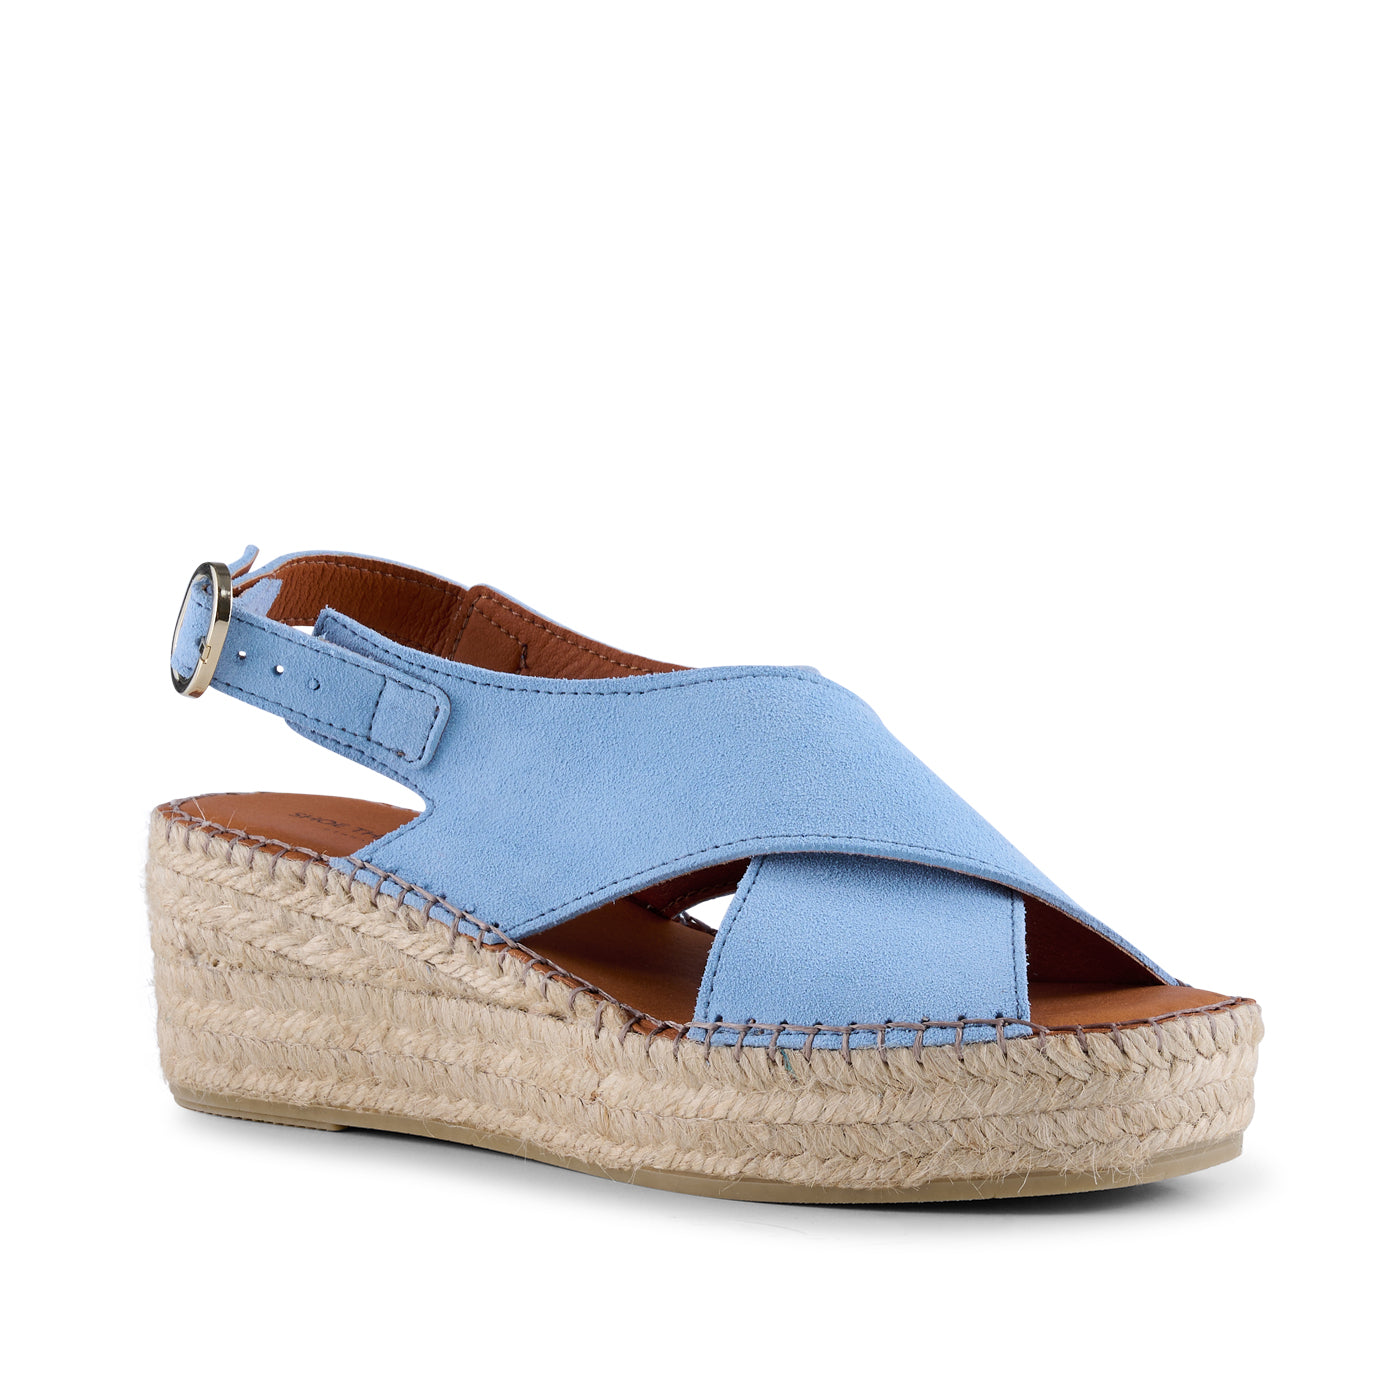 SHOE THE BEAR WOMENS Orchid wedge suede Espadrilles 170 BLUE